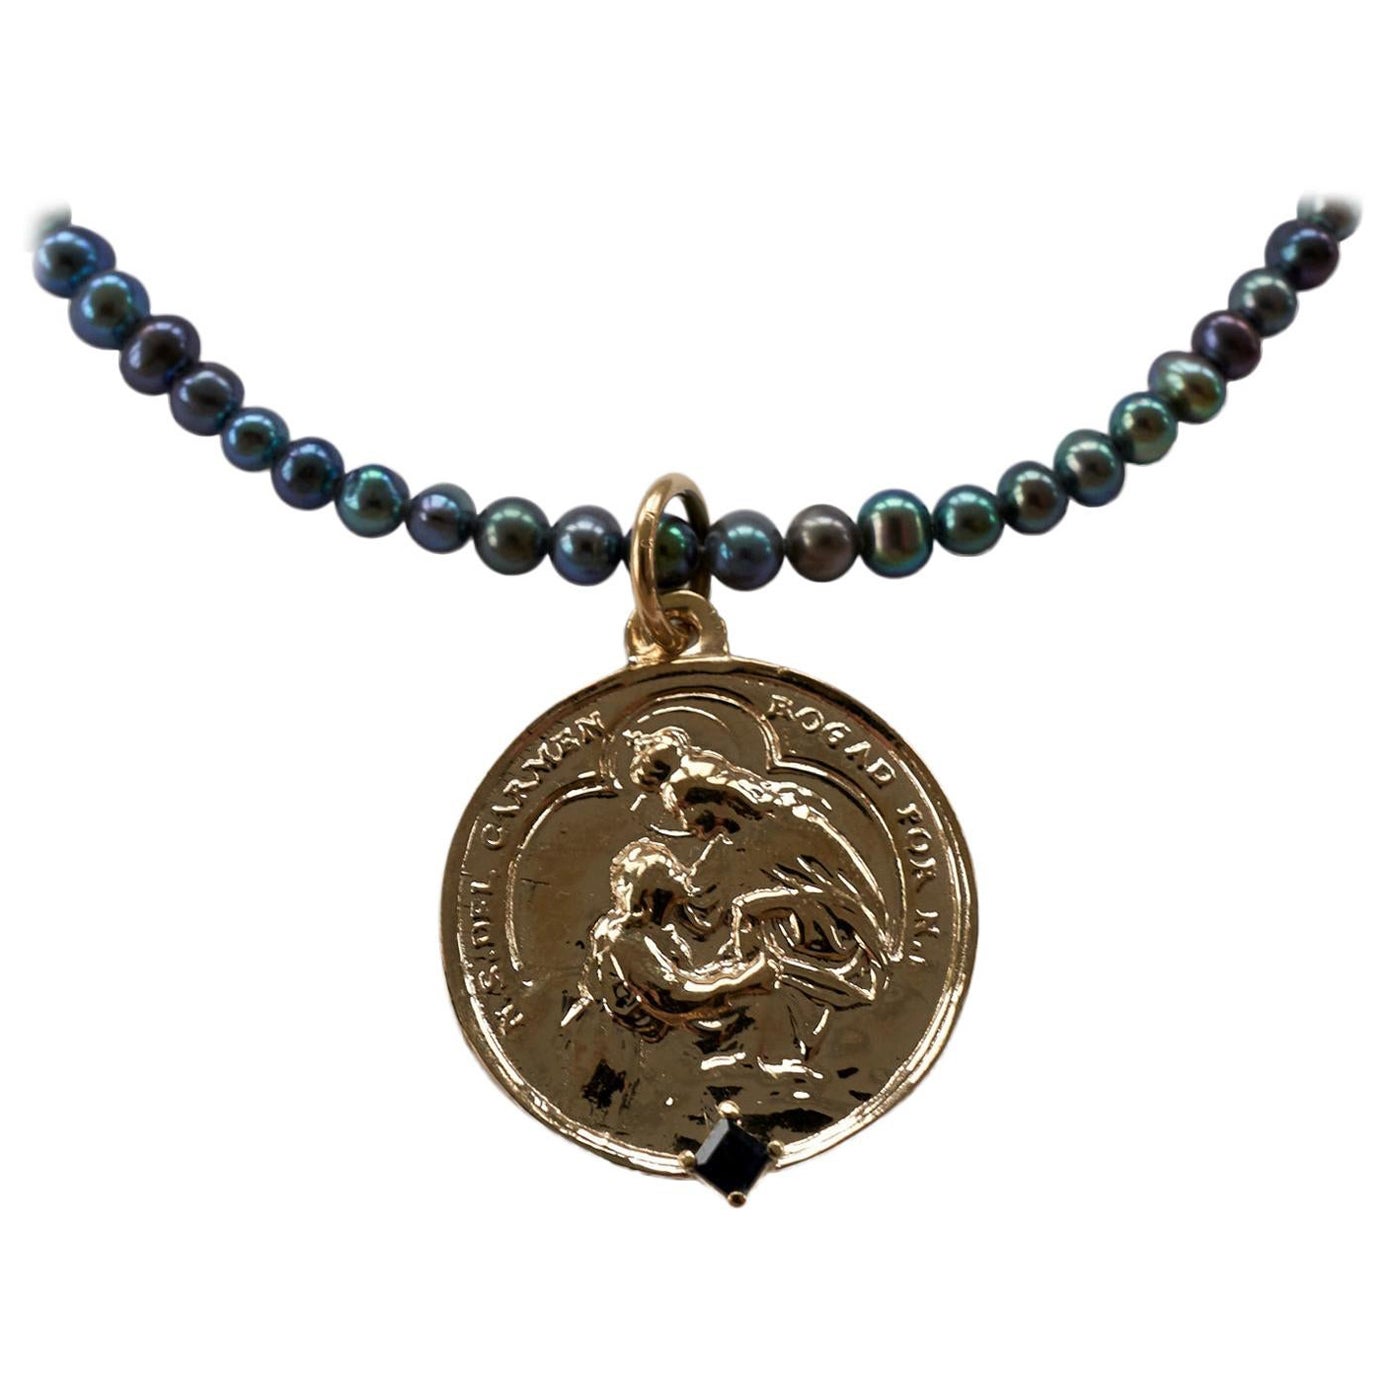 Sapphire Virgin del Carmen Medal Necklace Coin Pendant Chain Black Pearl J Dauphin

This necklace features a medal of the Virgin Del Carmen adorned with a square-cut blue sapphire, suspended from a striking black pearl bead necklace. The blue